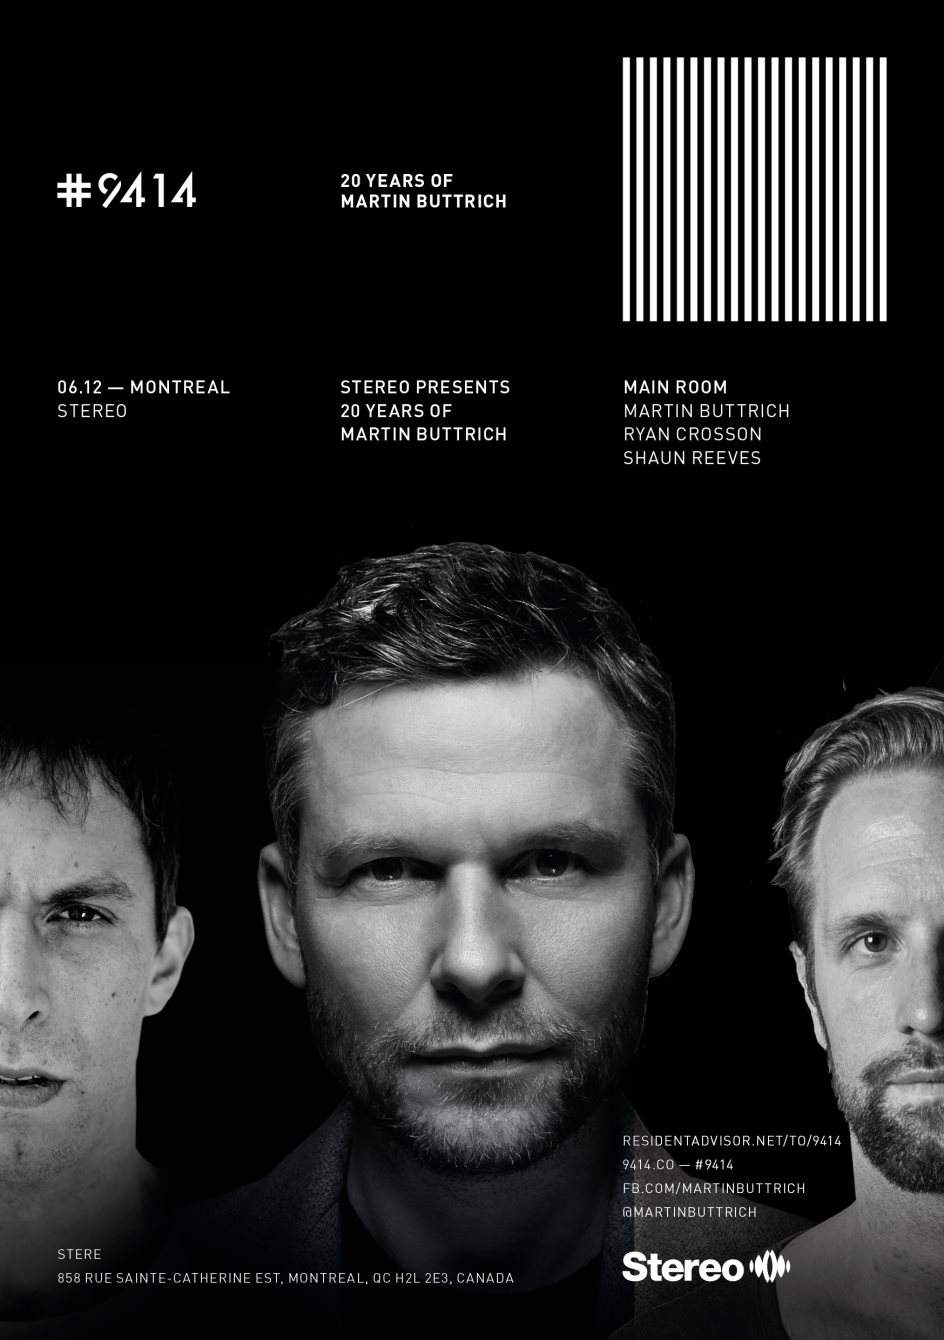 #9414 20 Years of Martin Buttrich Tour with Ryan Crosson and Shaun Reeves - Página frontal